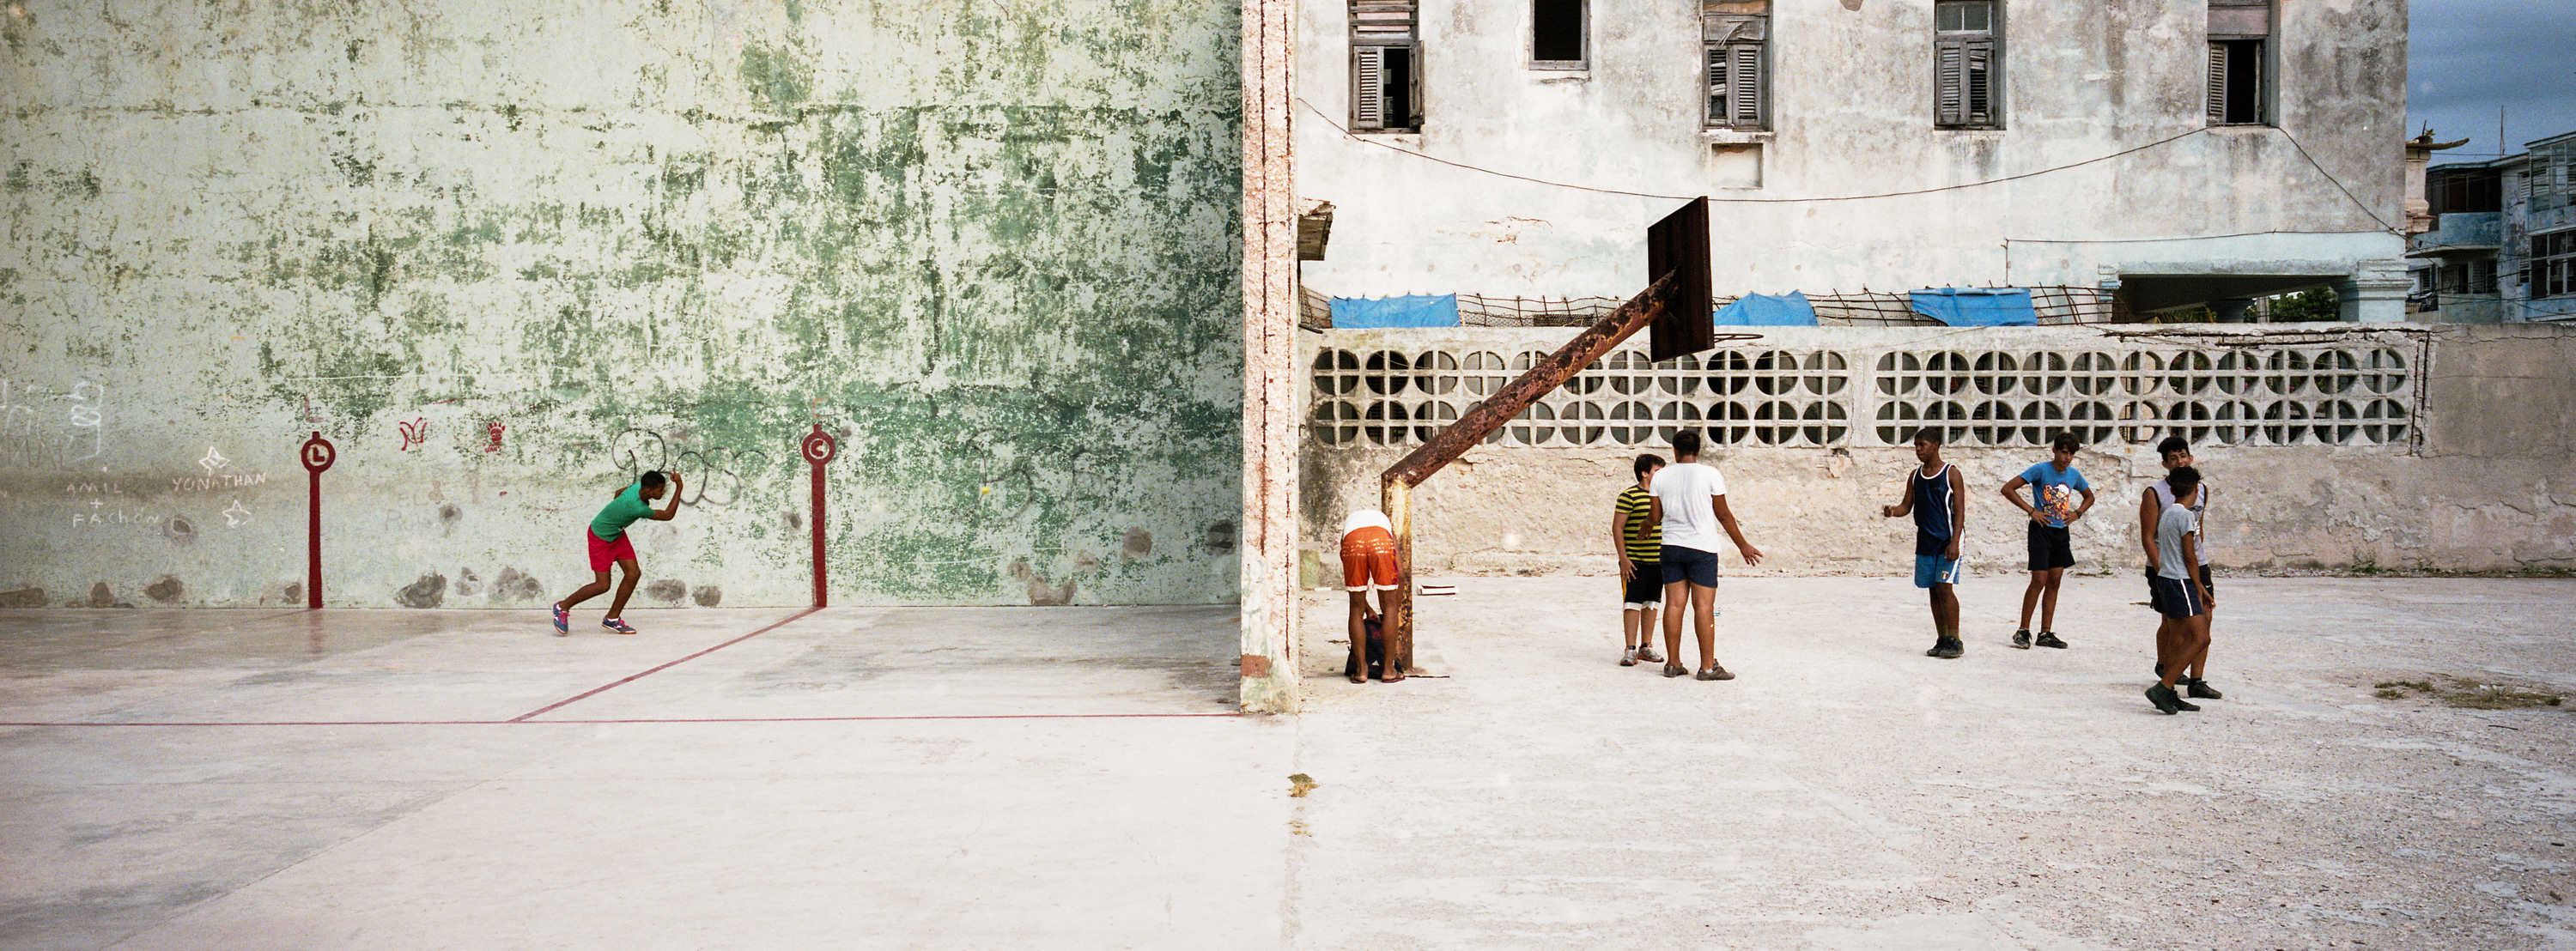 Neil Ta on Shooting Cuba with a Hasselblad XPan